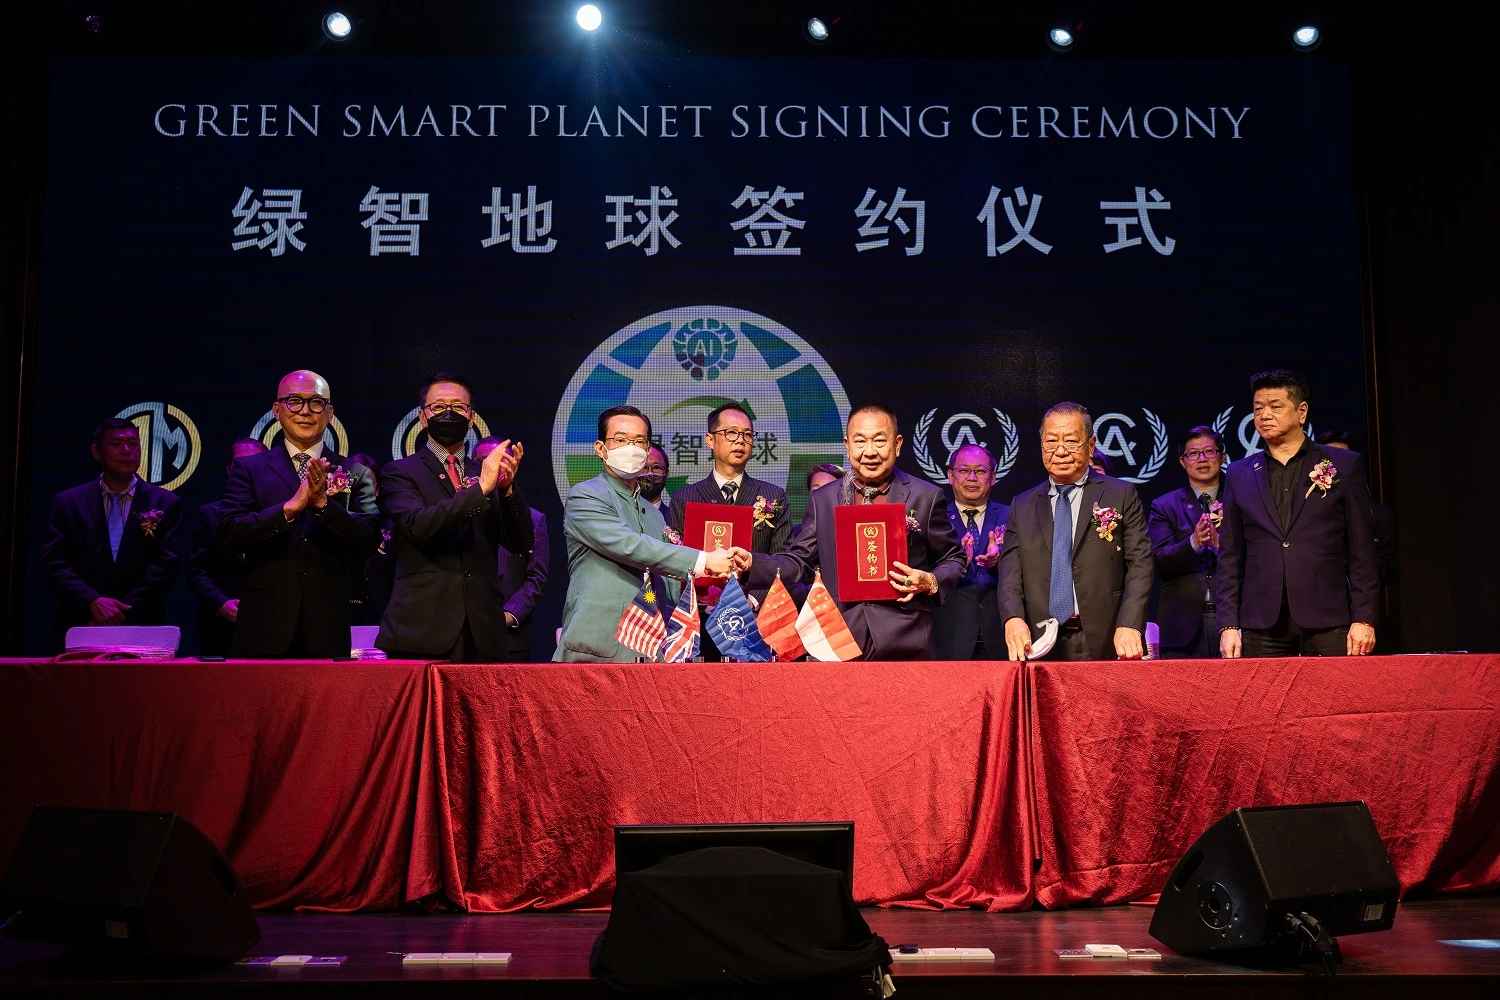 Green Smart Planet Market Operation Signing Ceremony